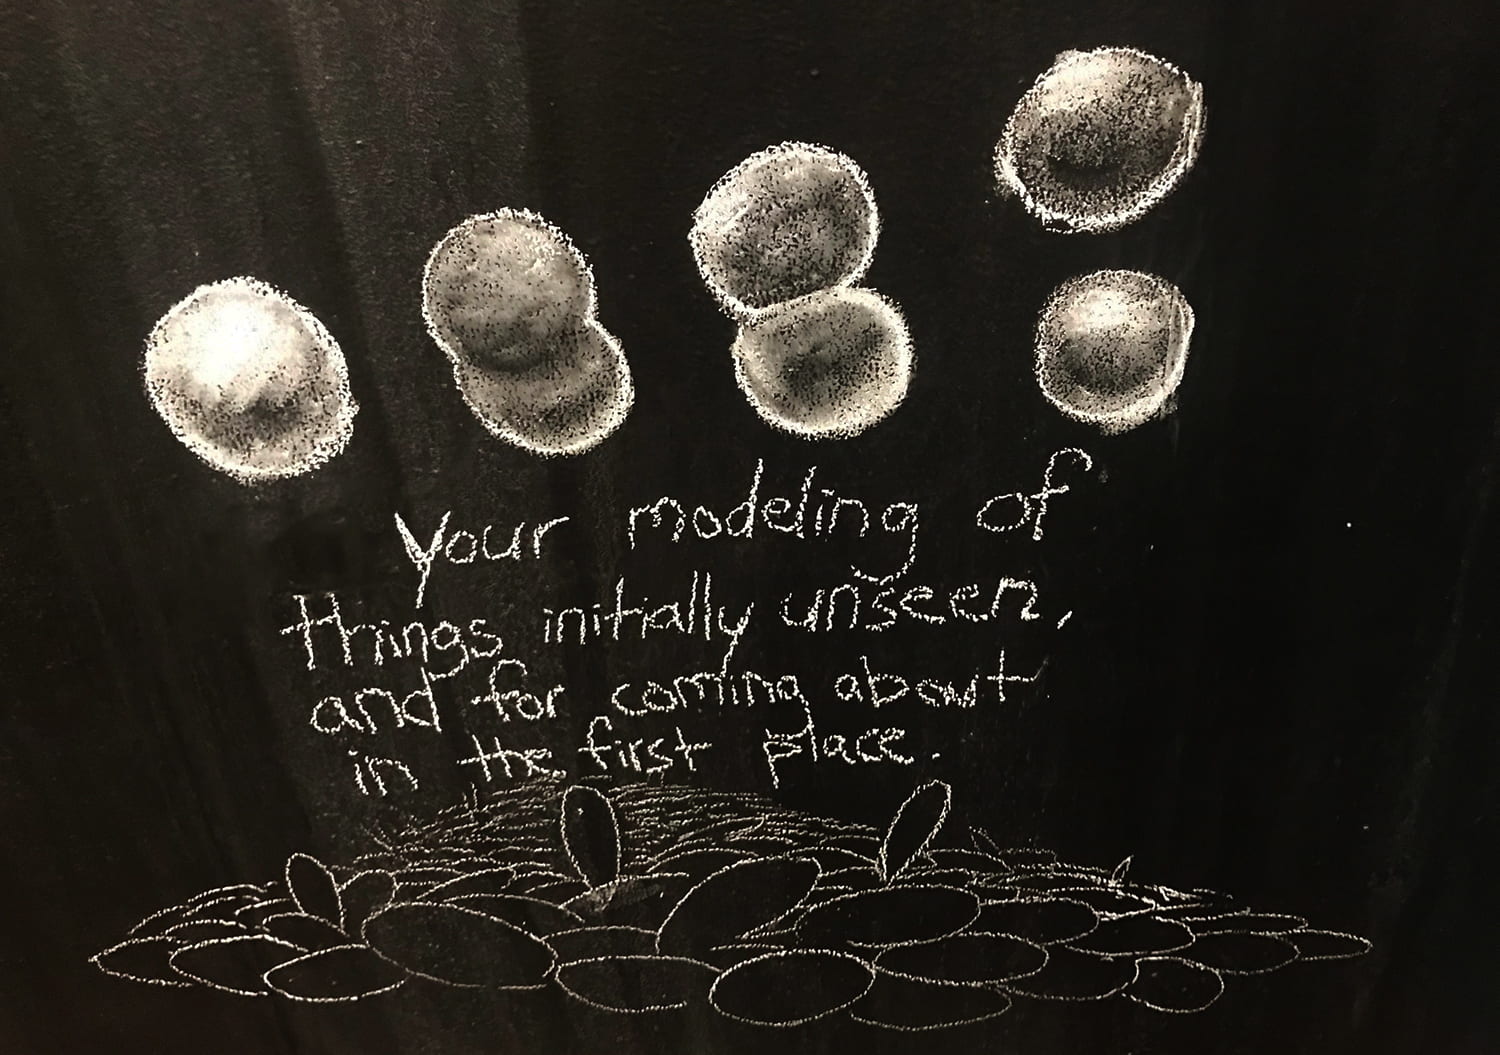 drawing of spherical objects floating above a pile of oval shapes and the words "Your modeling of things initially unseen, and for coming about in the first place."